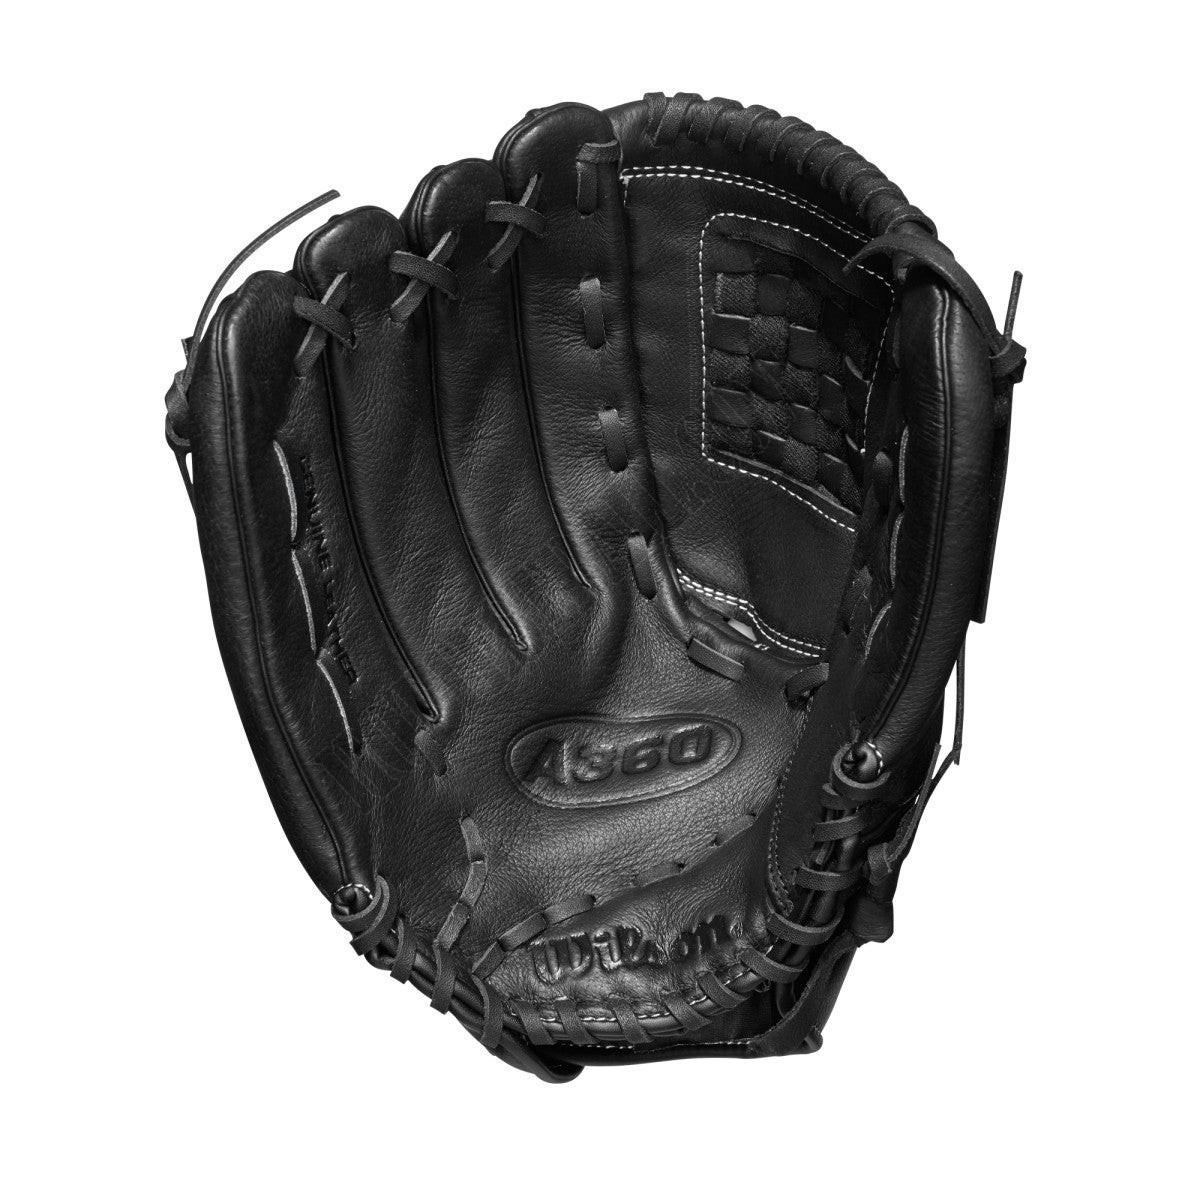 A360 14" Slowpitch Glove - Left Hand Throw ● Wilson Promotions - -1